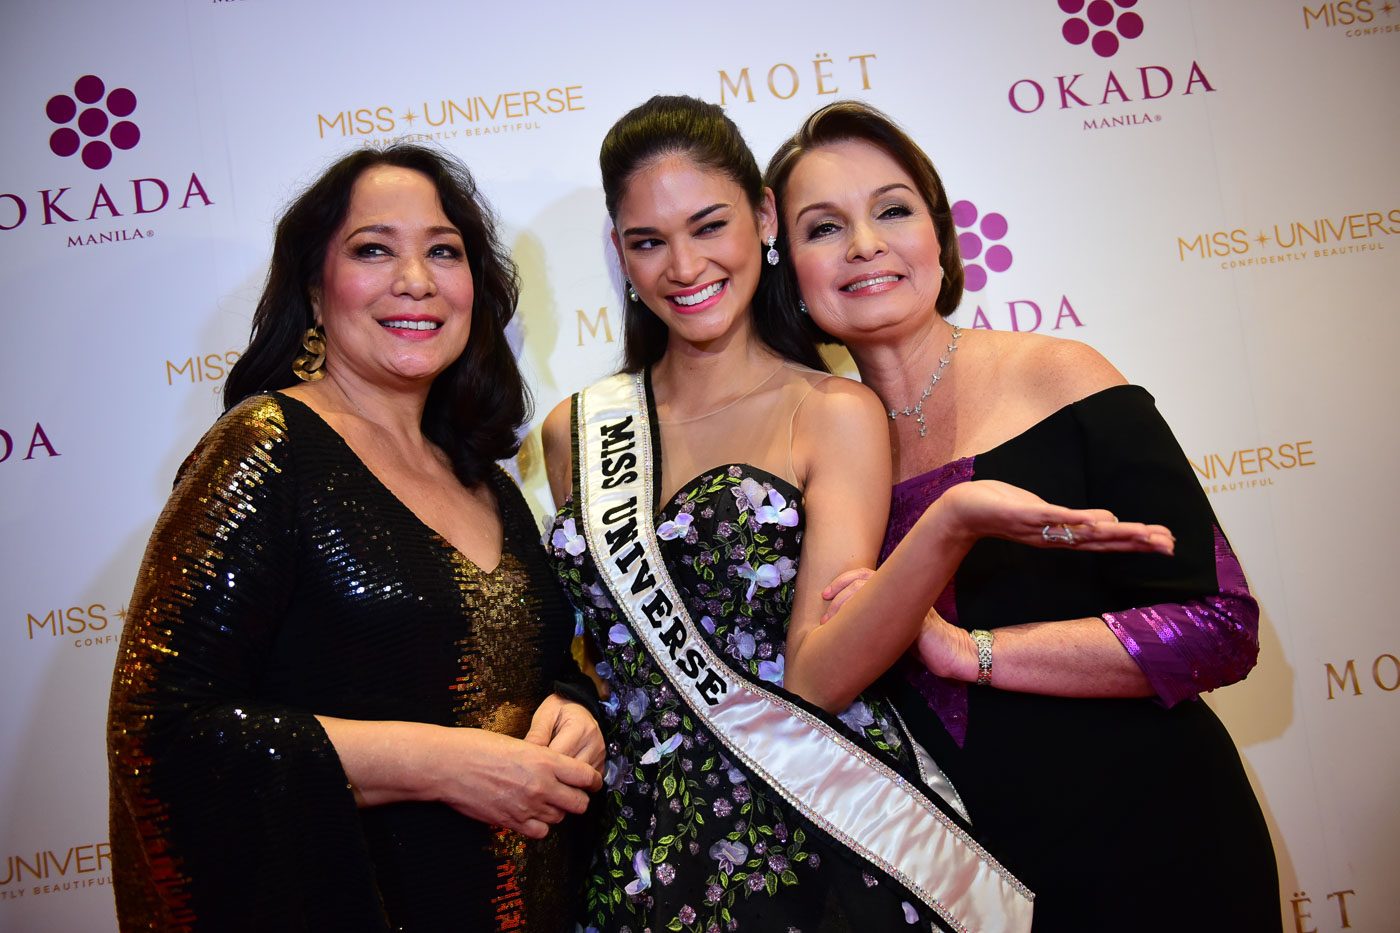 MISS UNIVERSE PHILIPPINES. (L-R) Miss Universe 1969 Gloria Diaz, Miss Universe 2015 Pia Wurtzbach, and Miss Universe 1973 Margarita Moran are the 3 Miss Universe queens from the Philippines. File photo by Alecs Ongcal/Rappler  